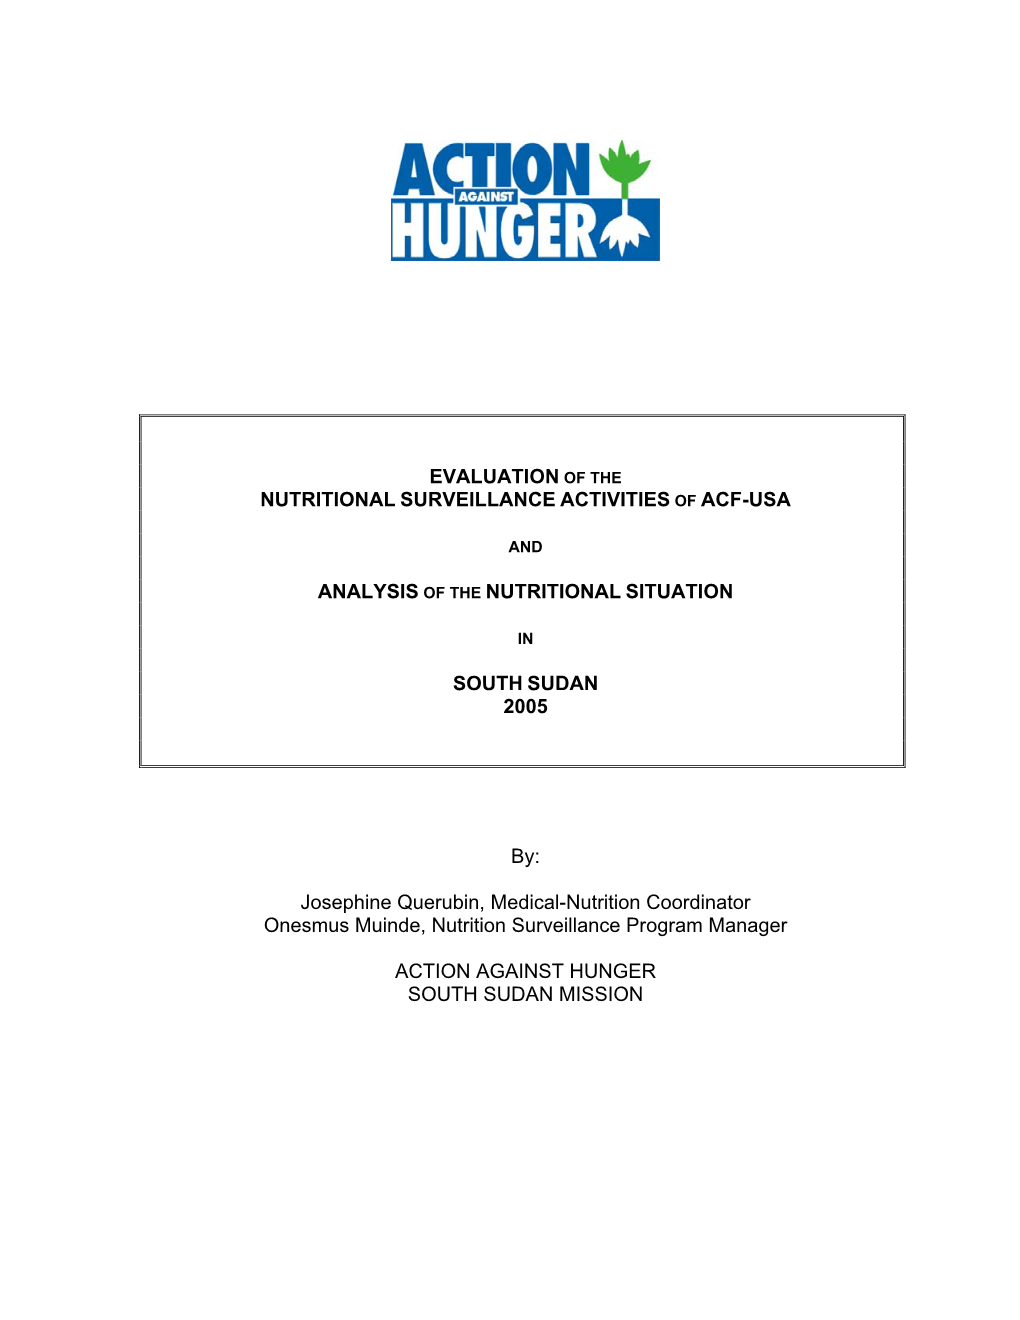 EVALUATION of the NUTRITIONAL SURVEILLANCE ACTIVITIES of ACF-USA ANALYSIS of the NUTRITIONAL SITUATION SOUTH SUDAN 2005 By